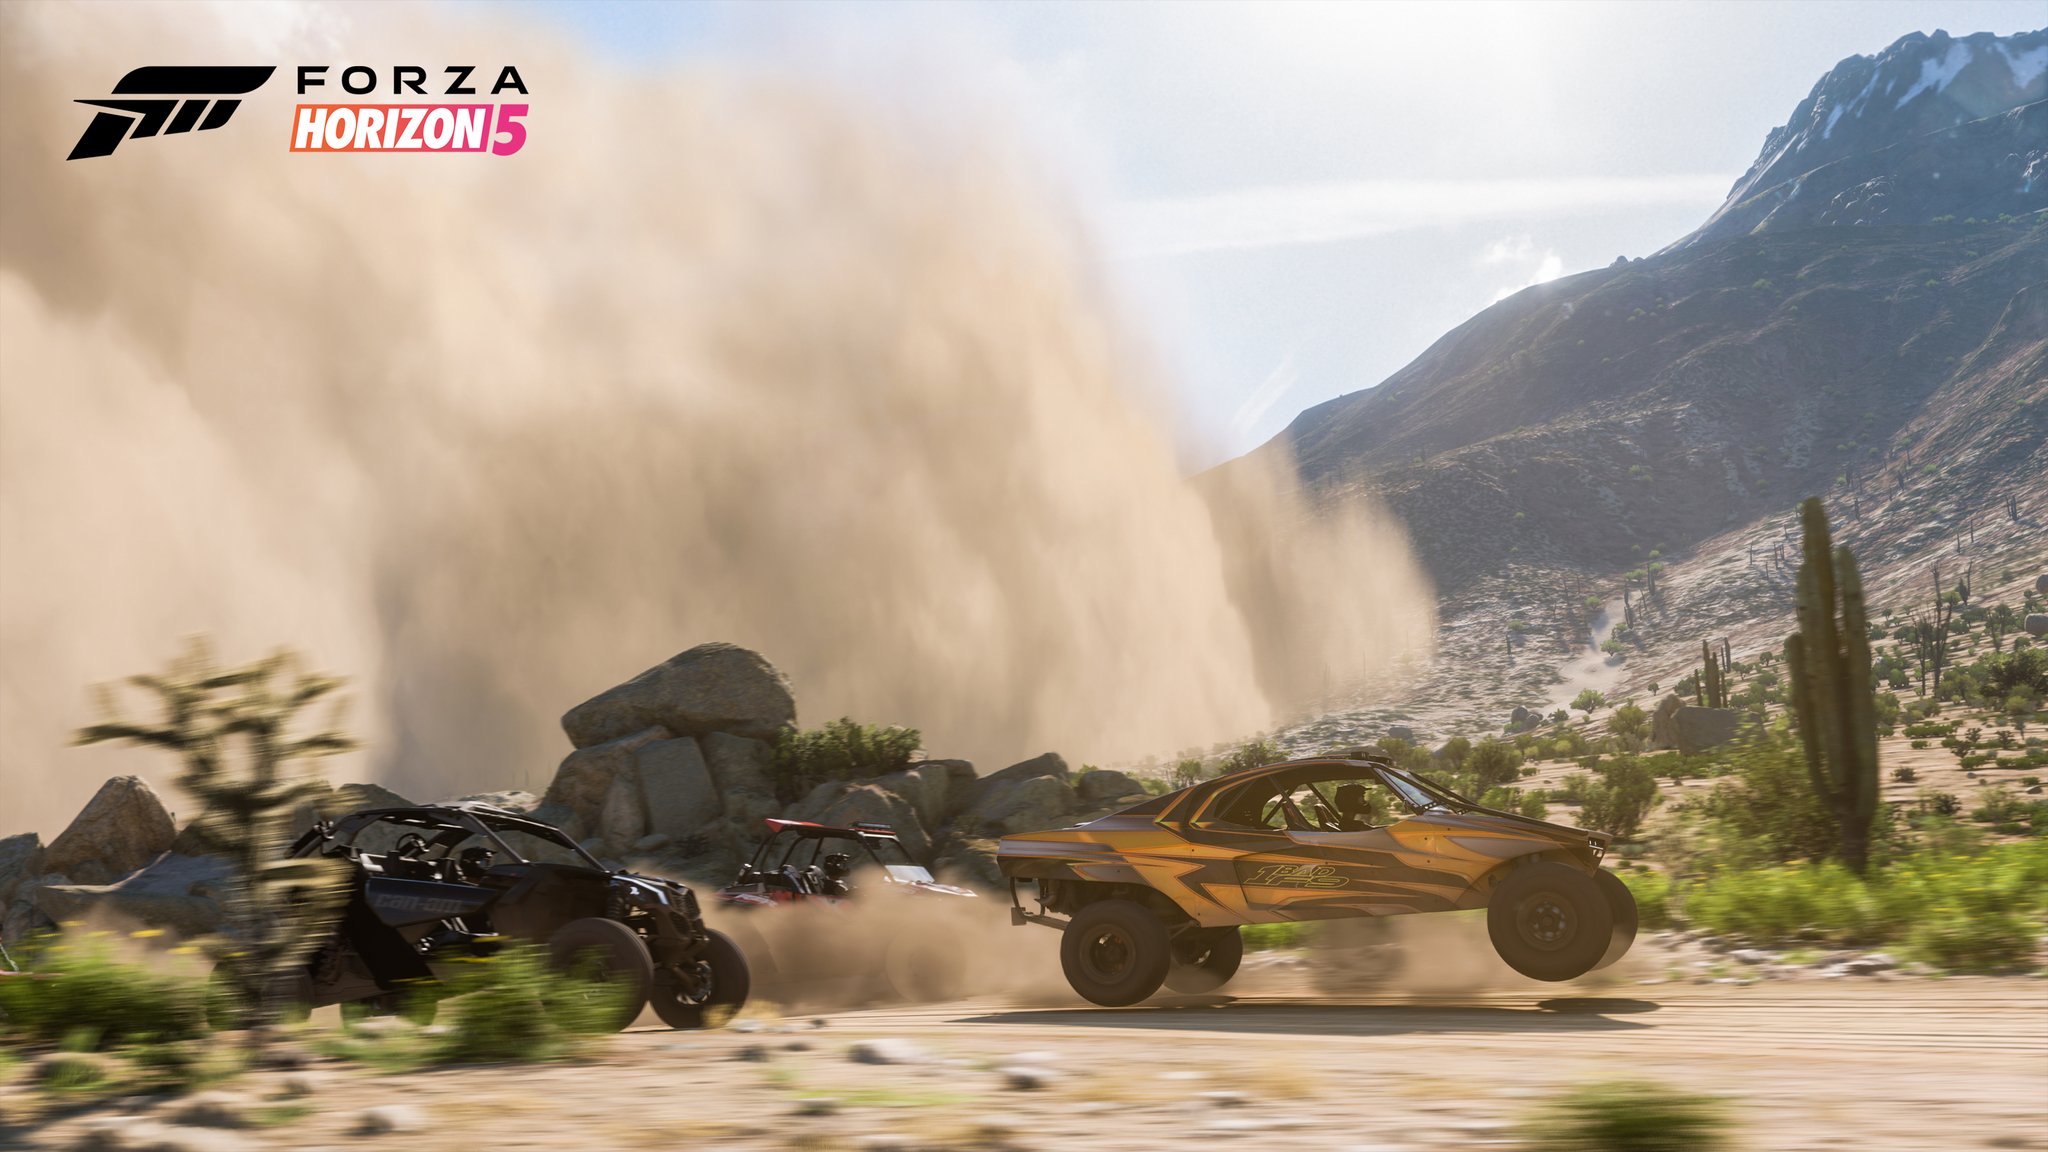 Forza Horizon 5 Series 5 update is available now with new cars, PR Stunts,  events, and bug fixes, forza horizon 5